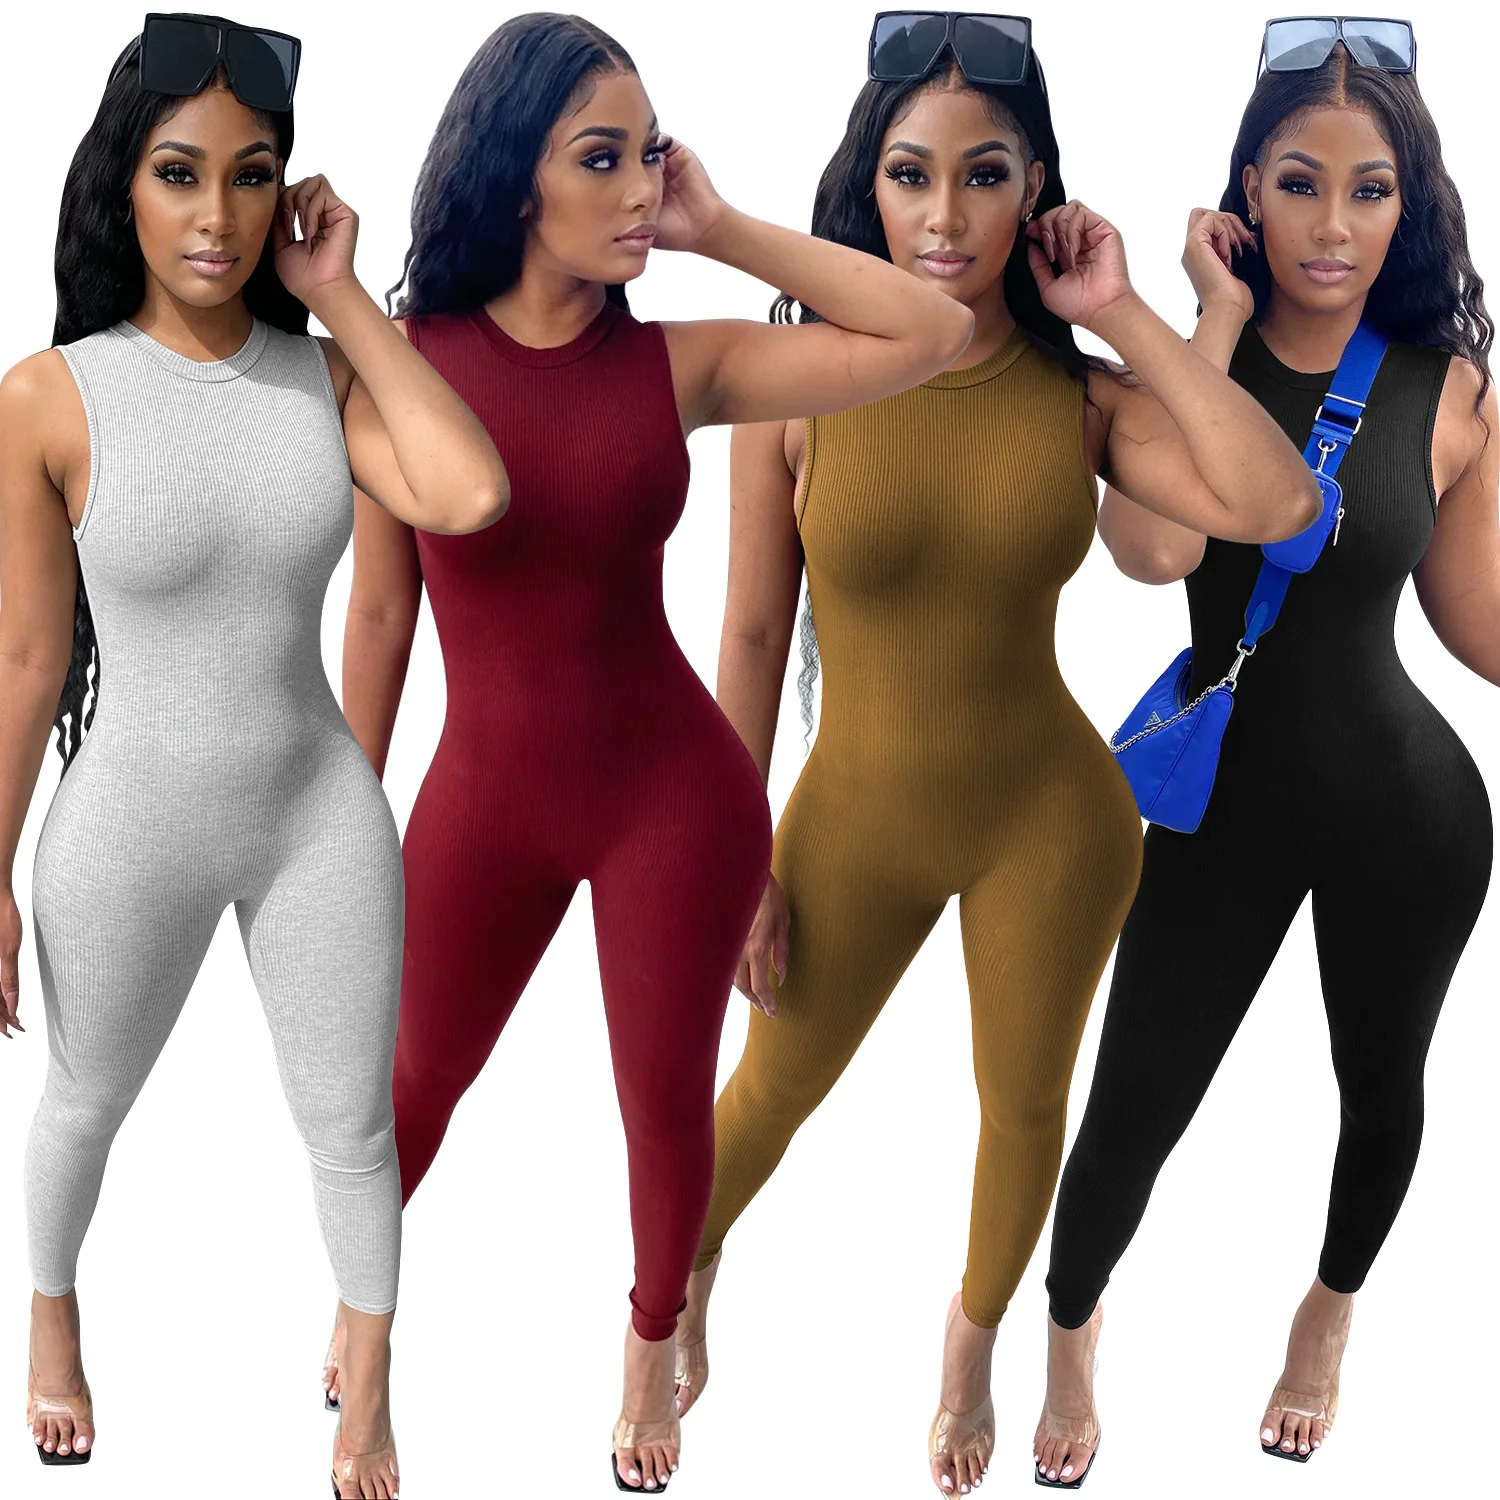 Ladies UK Women Casual Holiday Sleeveless Bodycon Romper Jumpsuit Club Party UK 